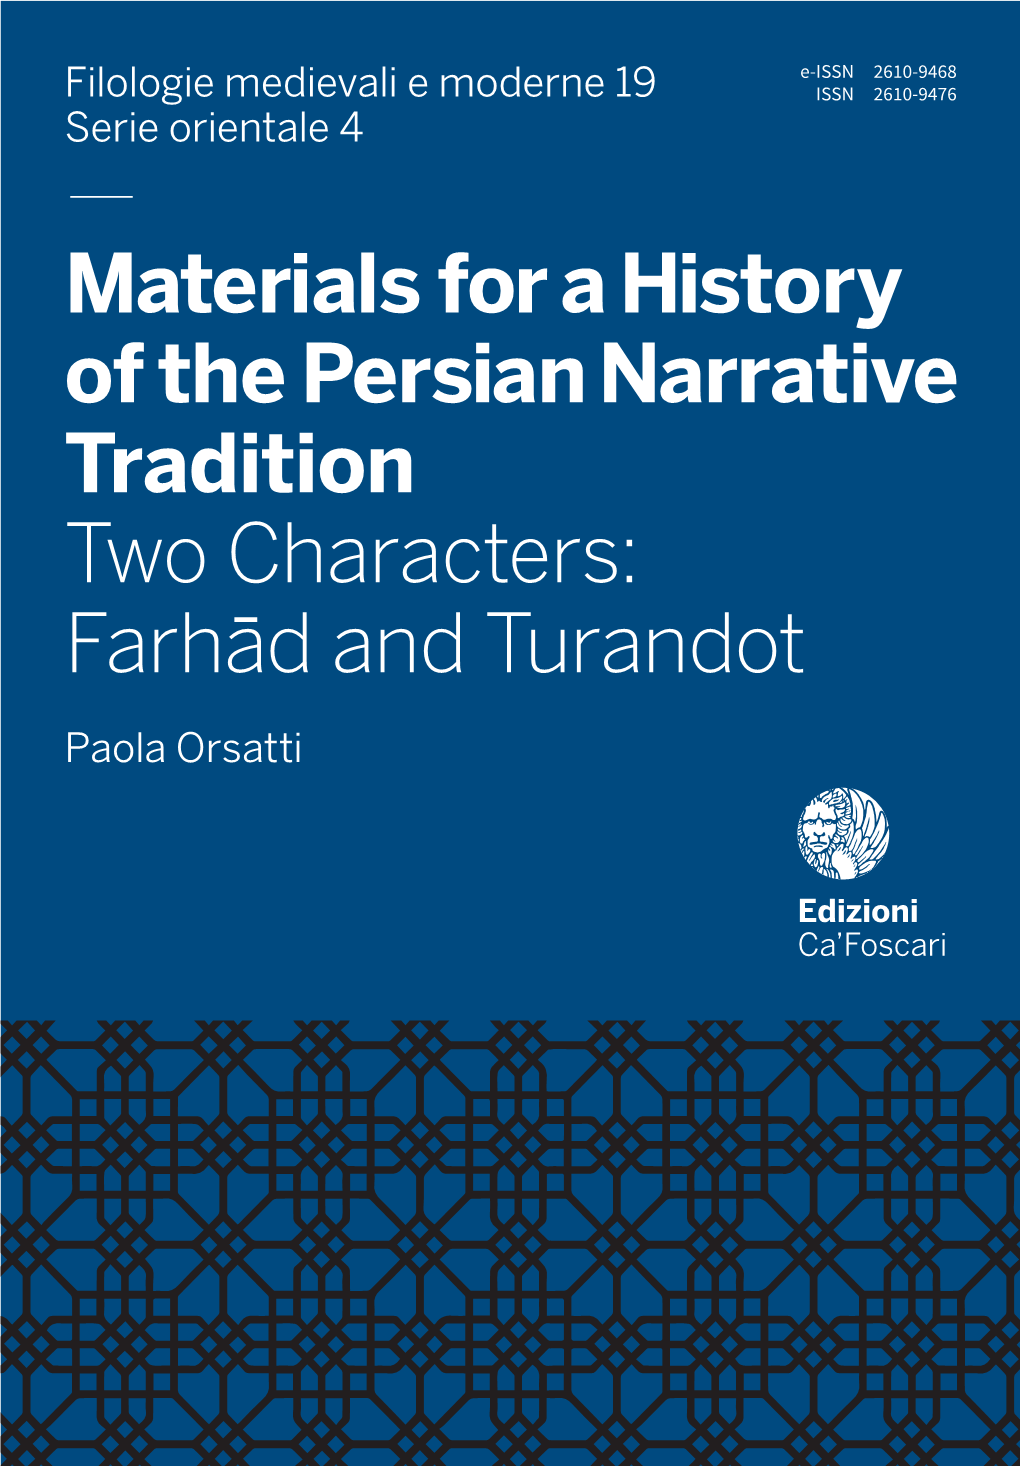 — Materials for a History of the Persian Narrative Tradition Two